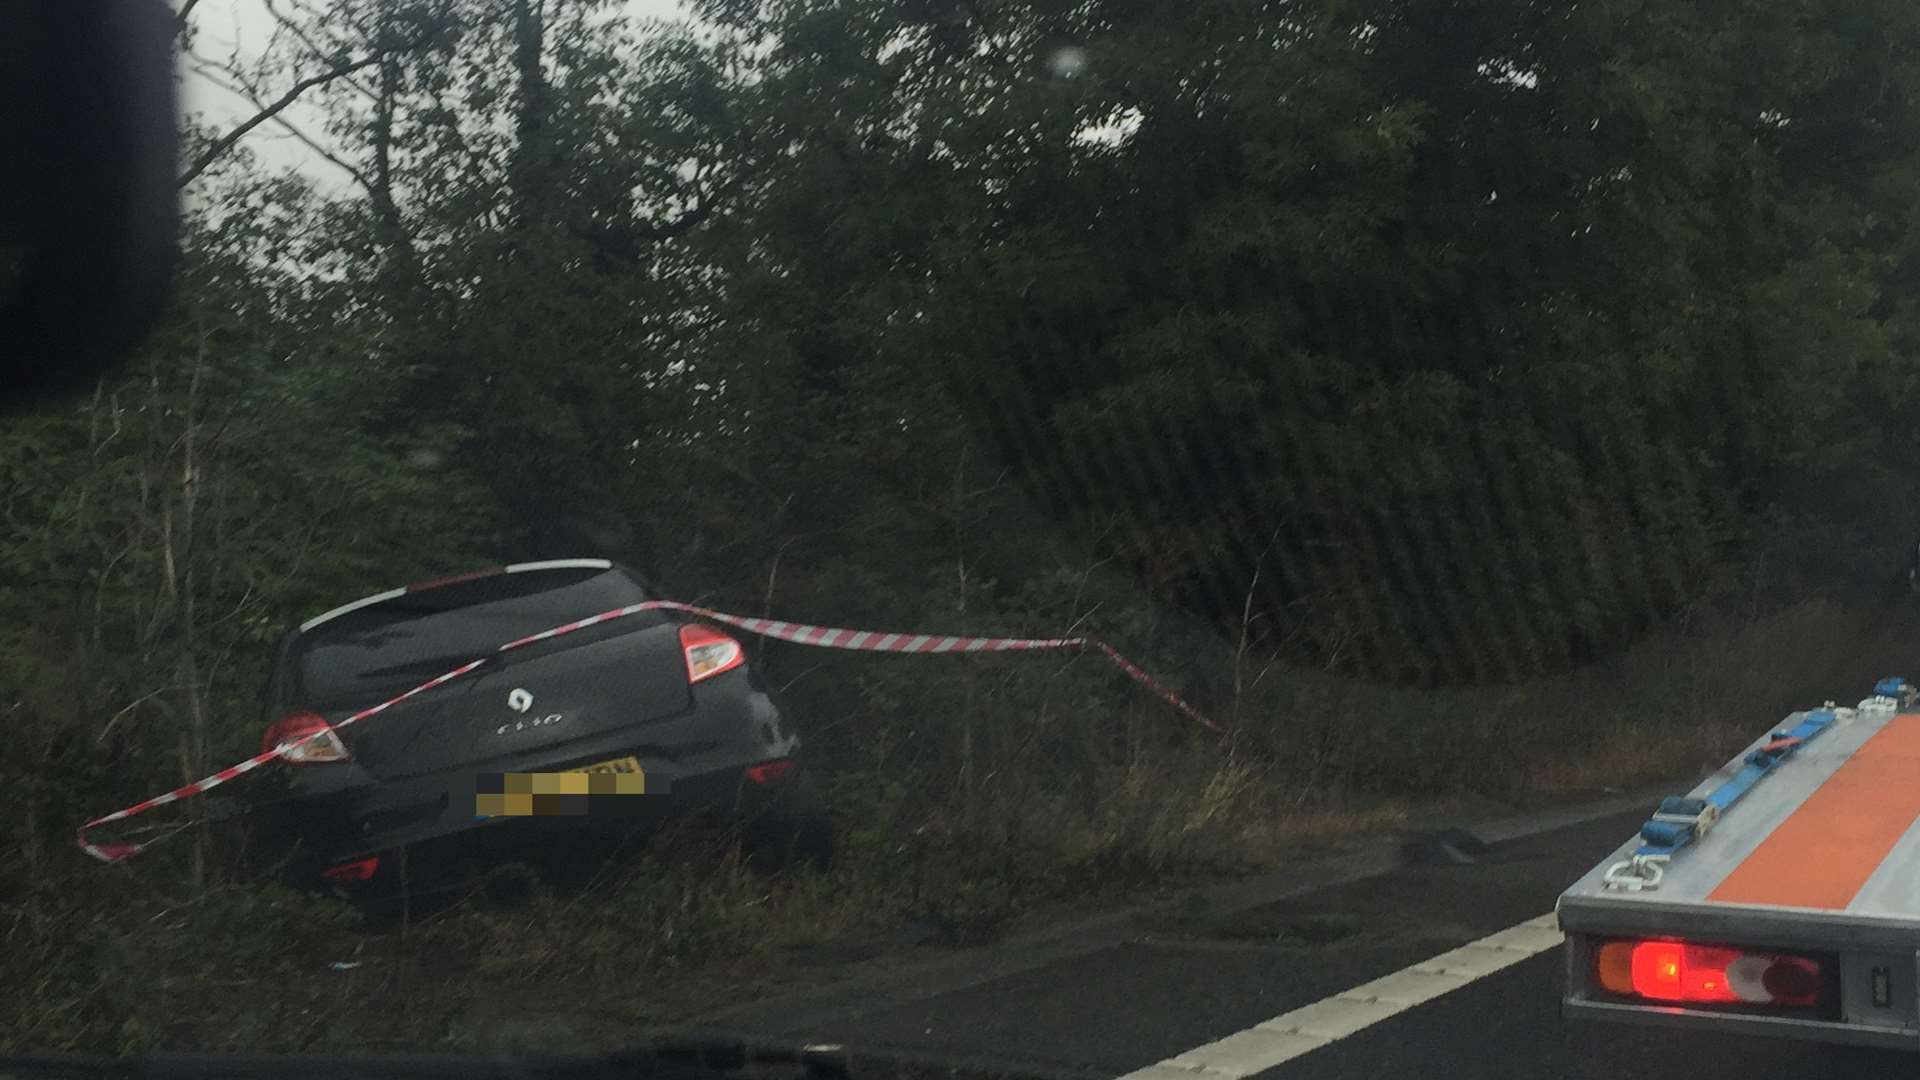 One car involved in the crash went down a ditch